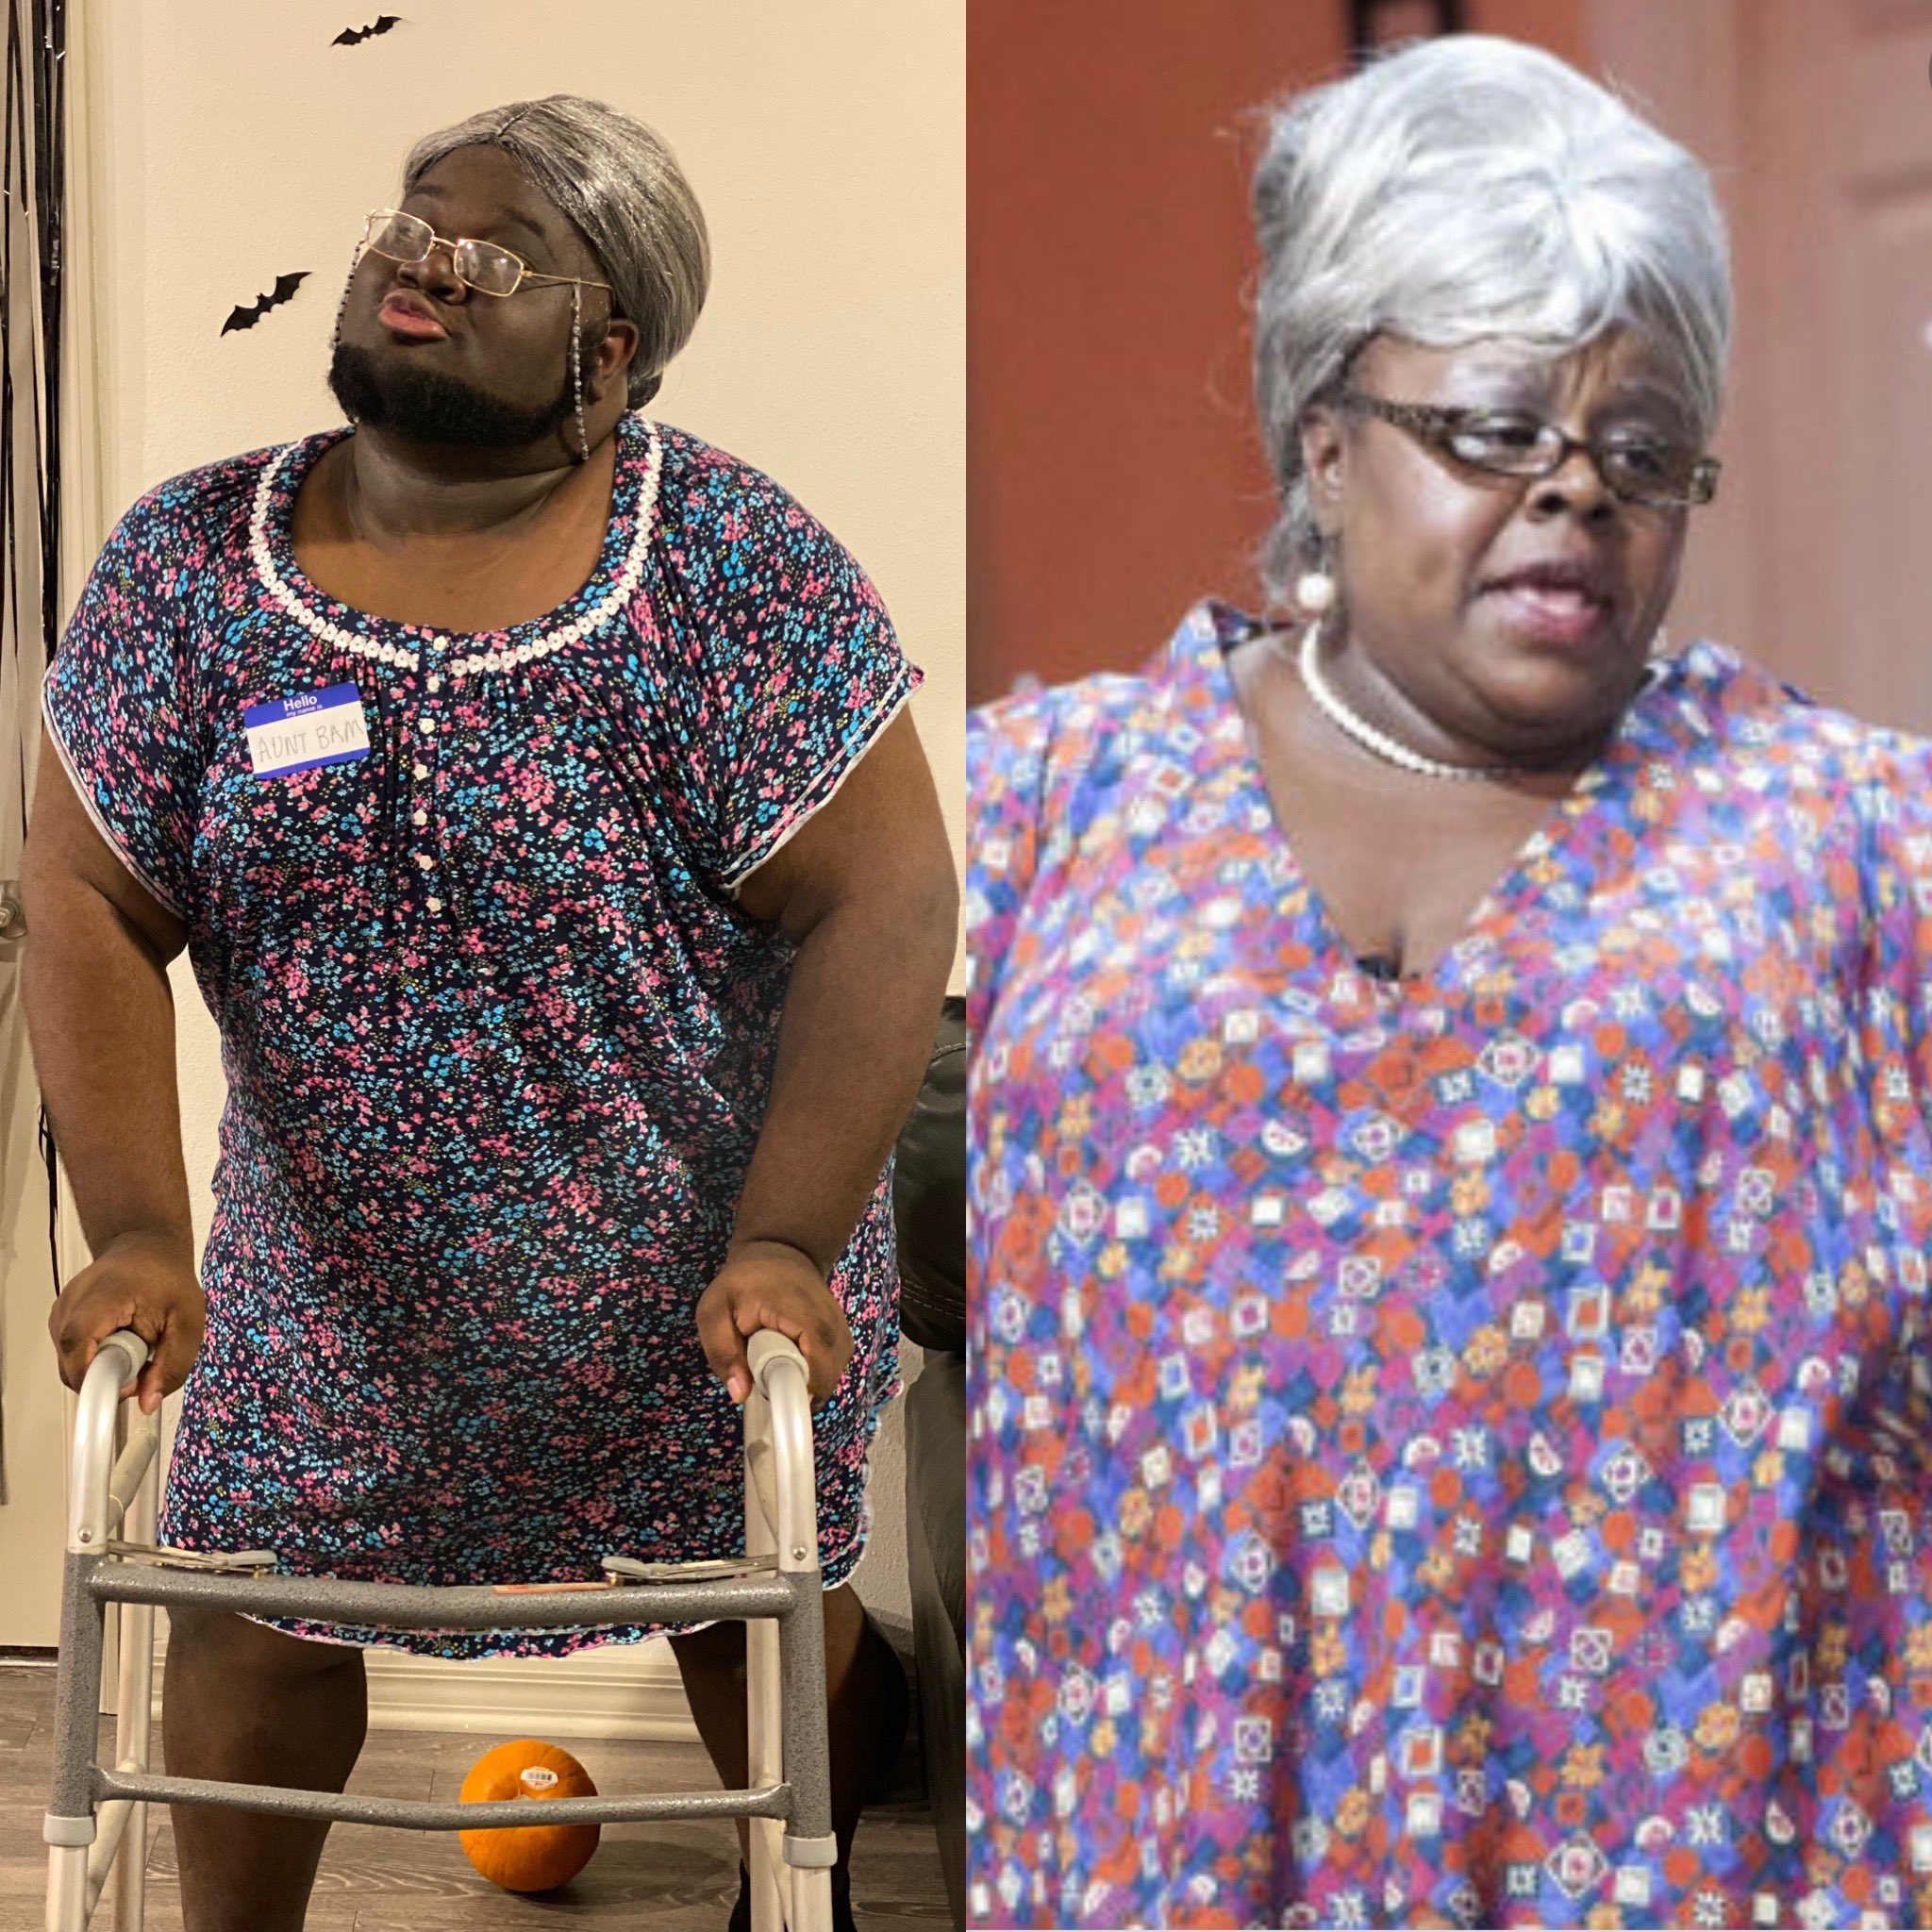 iamjerr on X: "AUNT BAM kicked it off who will be next #Halloween #costume #auntbam #madea #halloween2021 https://t.co/y2MK2qhwtX" / X